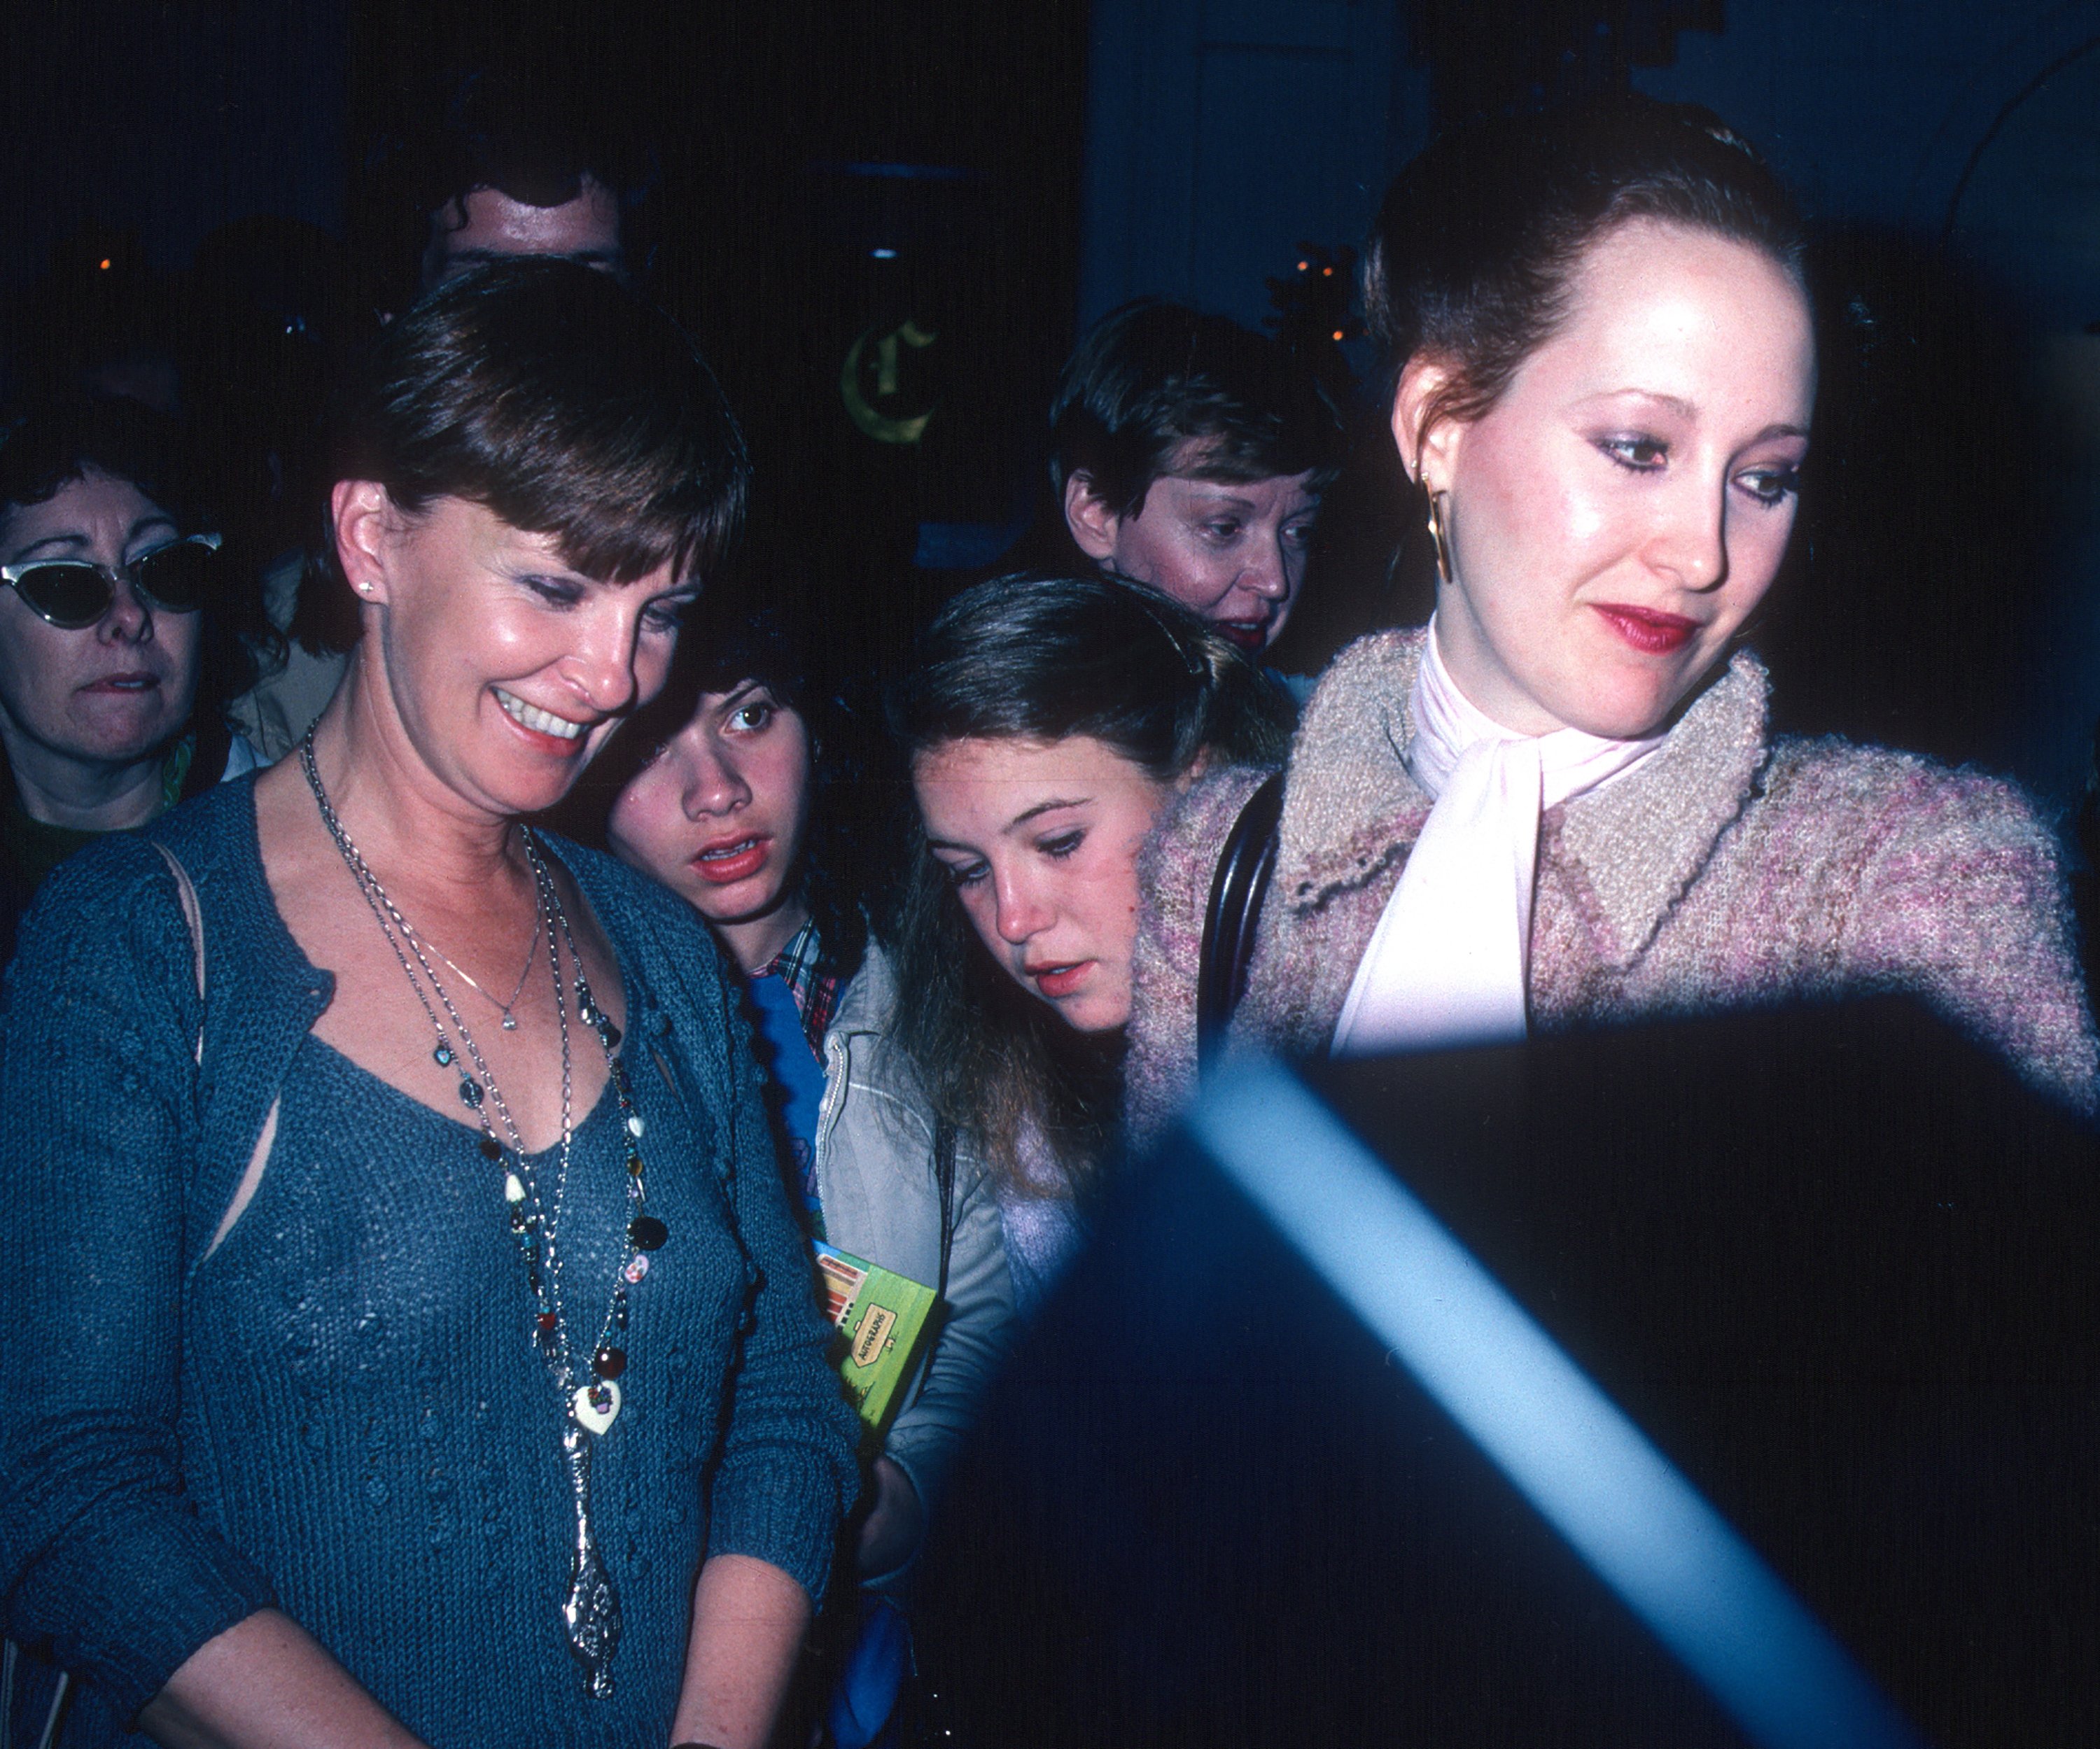 American actor Joanne Woodward (left) and her stepdaughter, film producer Susan Newman sighted at Chasen's restaurant, Beverly Hills, California, March 29, 1981. | Source: Getty Images